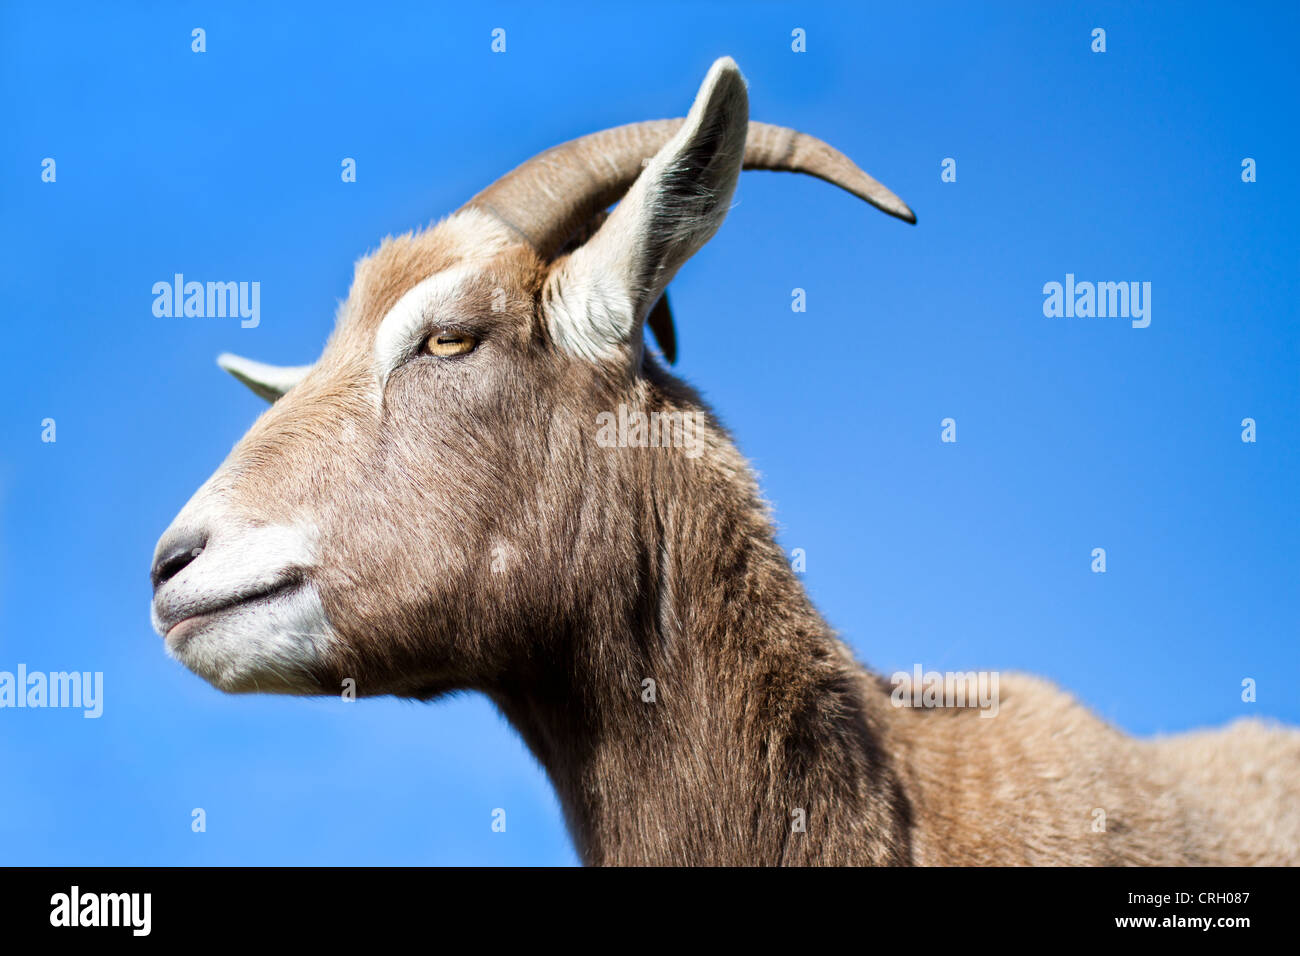 Goat standing side profile with blue sky background Stock Photo